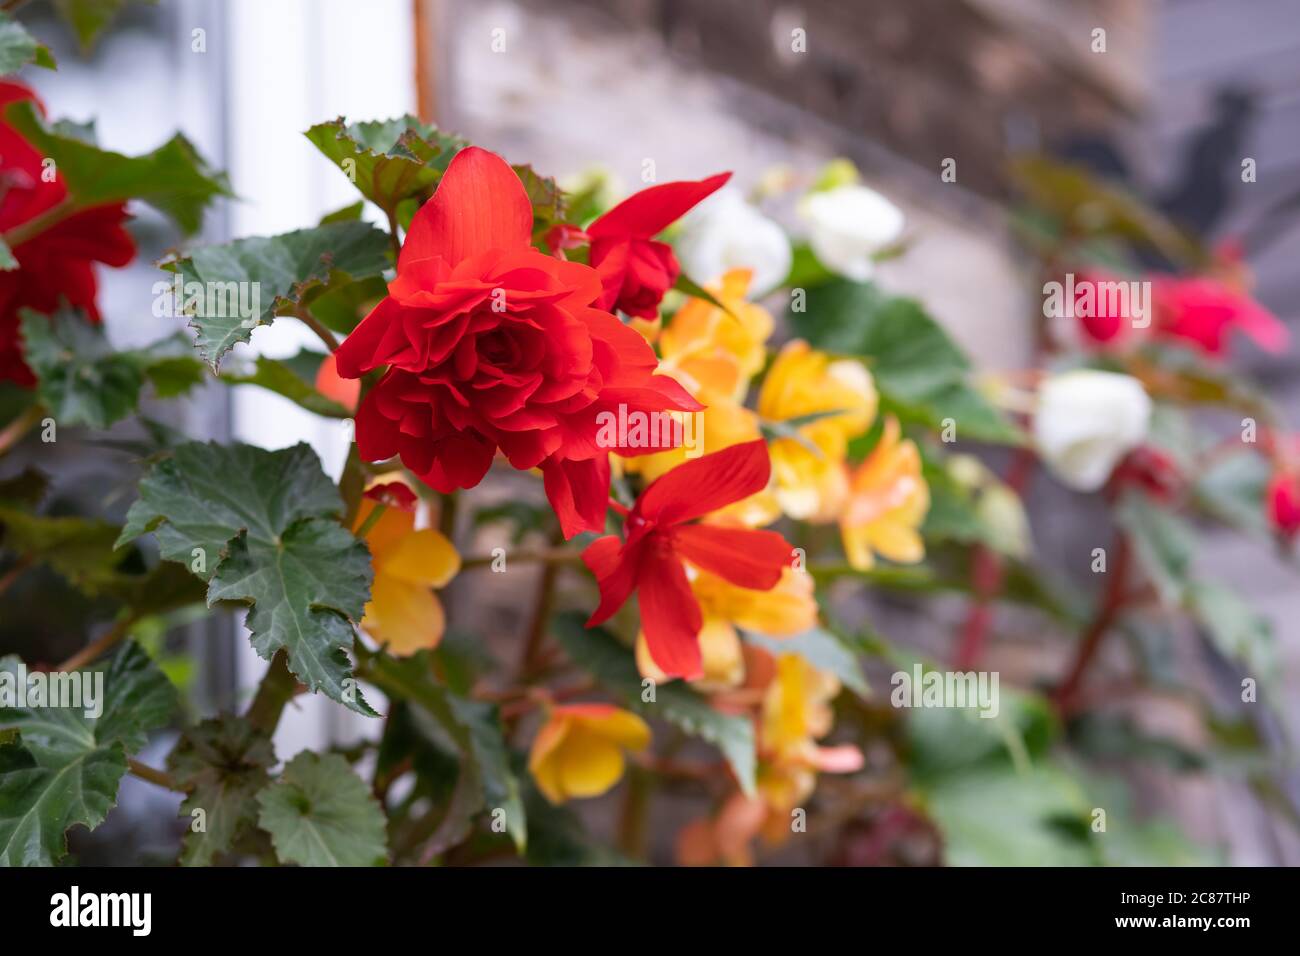 Potted begonias in the garden. Begonia Potted on Terrace.Cascade flowers of red and yellow Begonia hanging in a pot in the garden Stock Photo